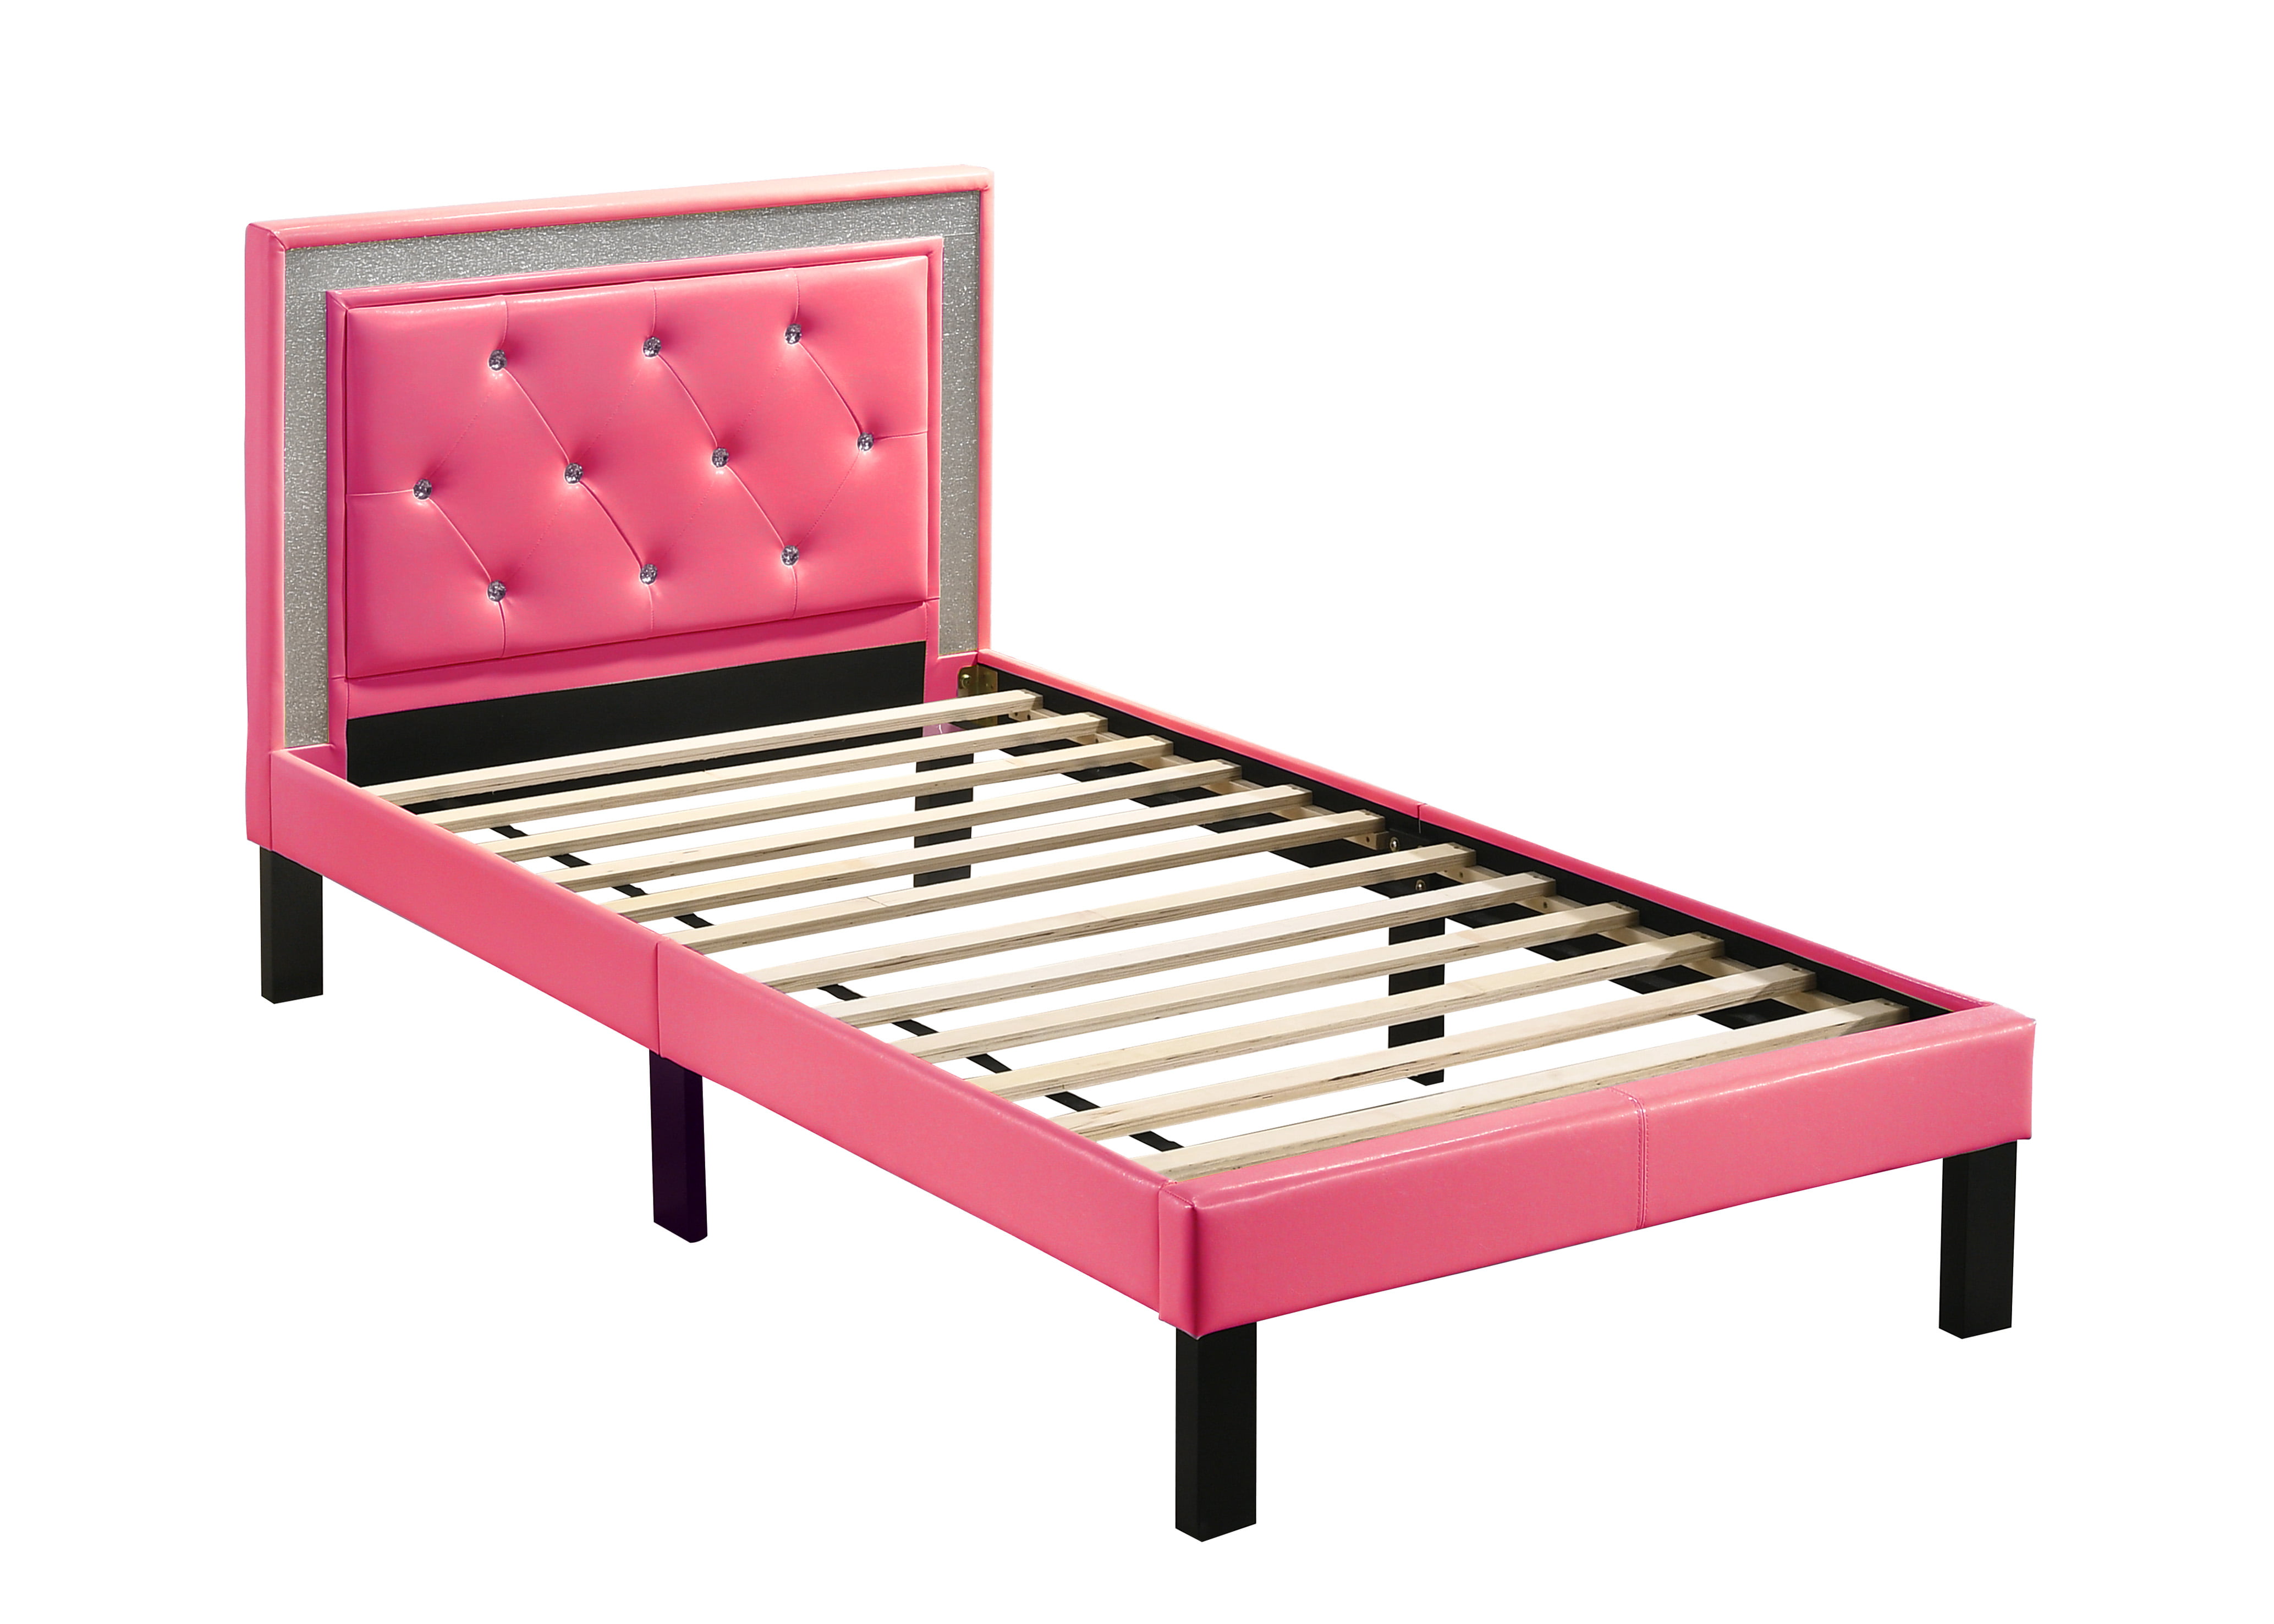 3 Colors: White Poundex PU Upholstered Platform Bed Black Twin Pink. 